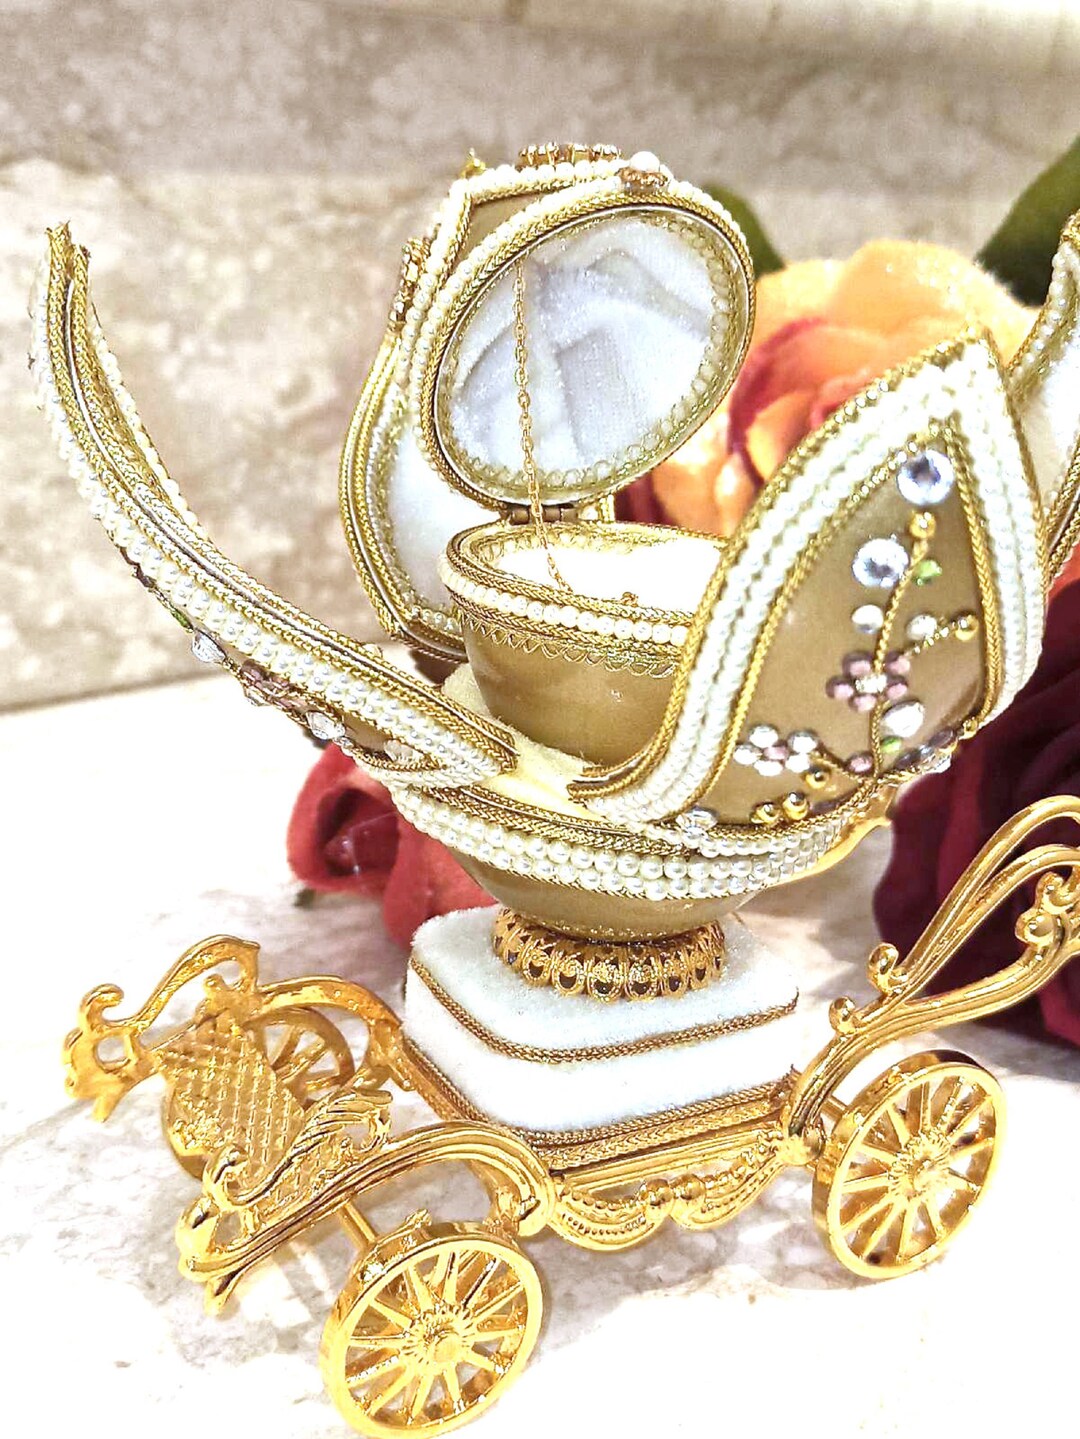 ONE ONLY 24K Faberge Design Egg Style Unique Collector Etsy Finland